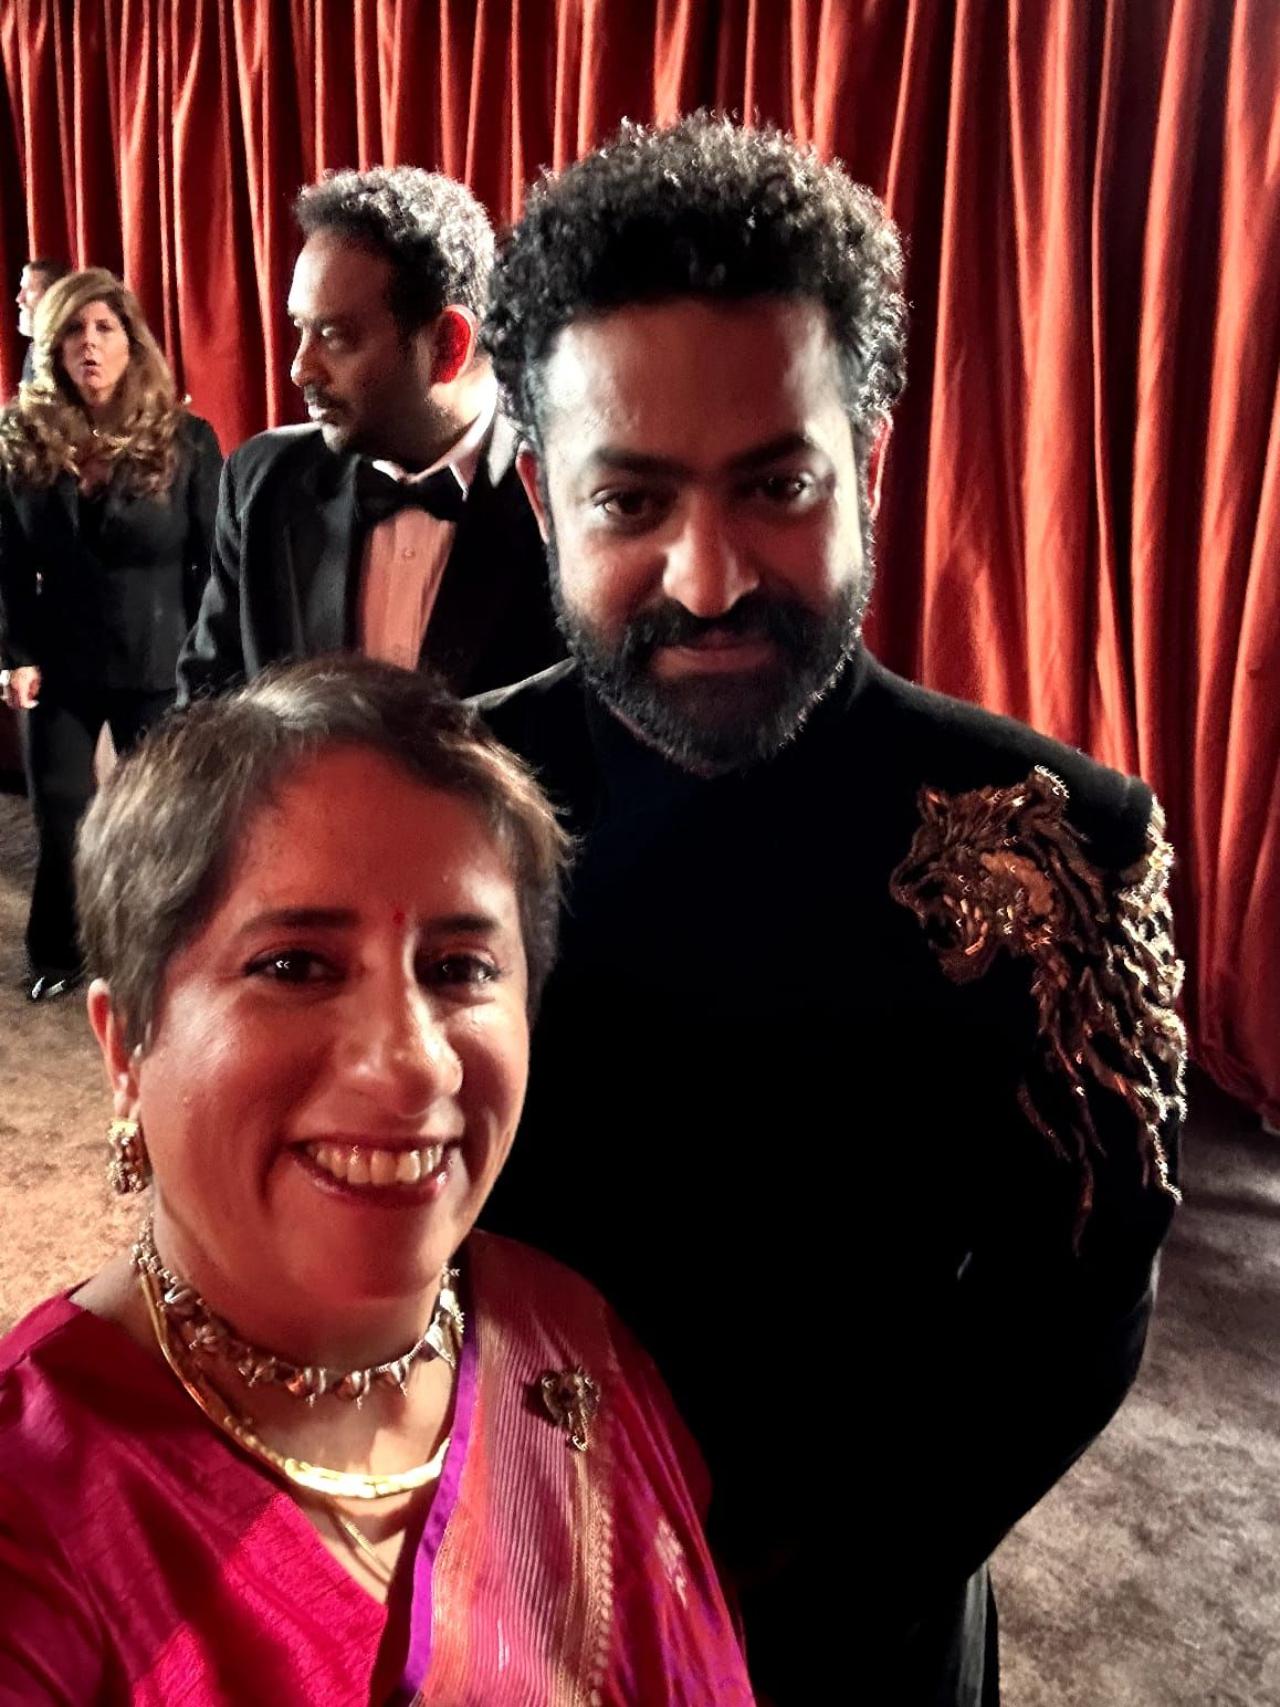 Award winners pose together at the Oscars 2023 red carpet. Guneet Monga clicked a selfie with Jr NTR as they met at Dolby Theatre at the ceremony